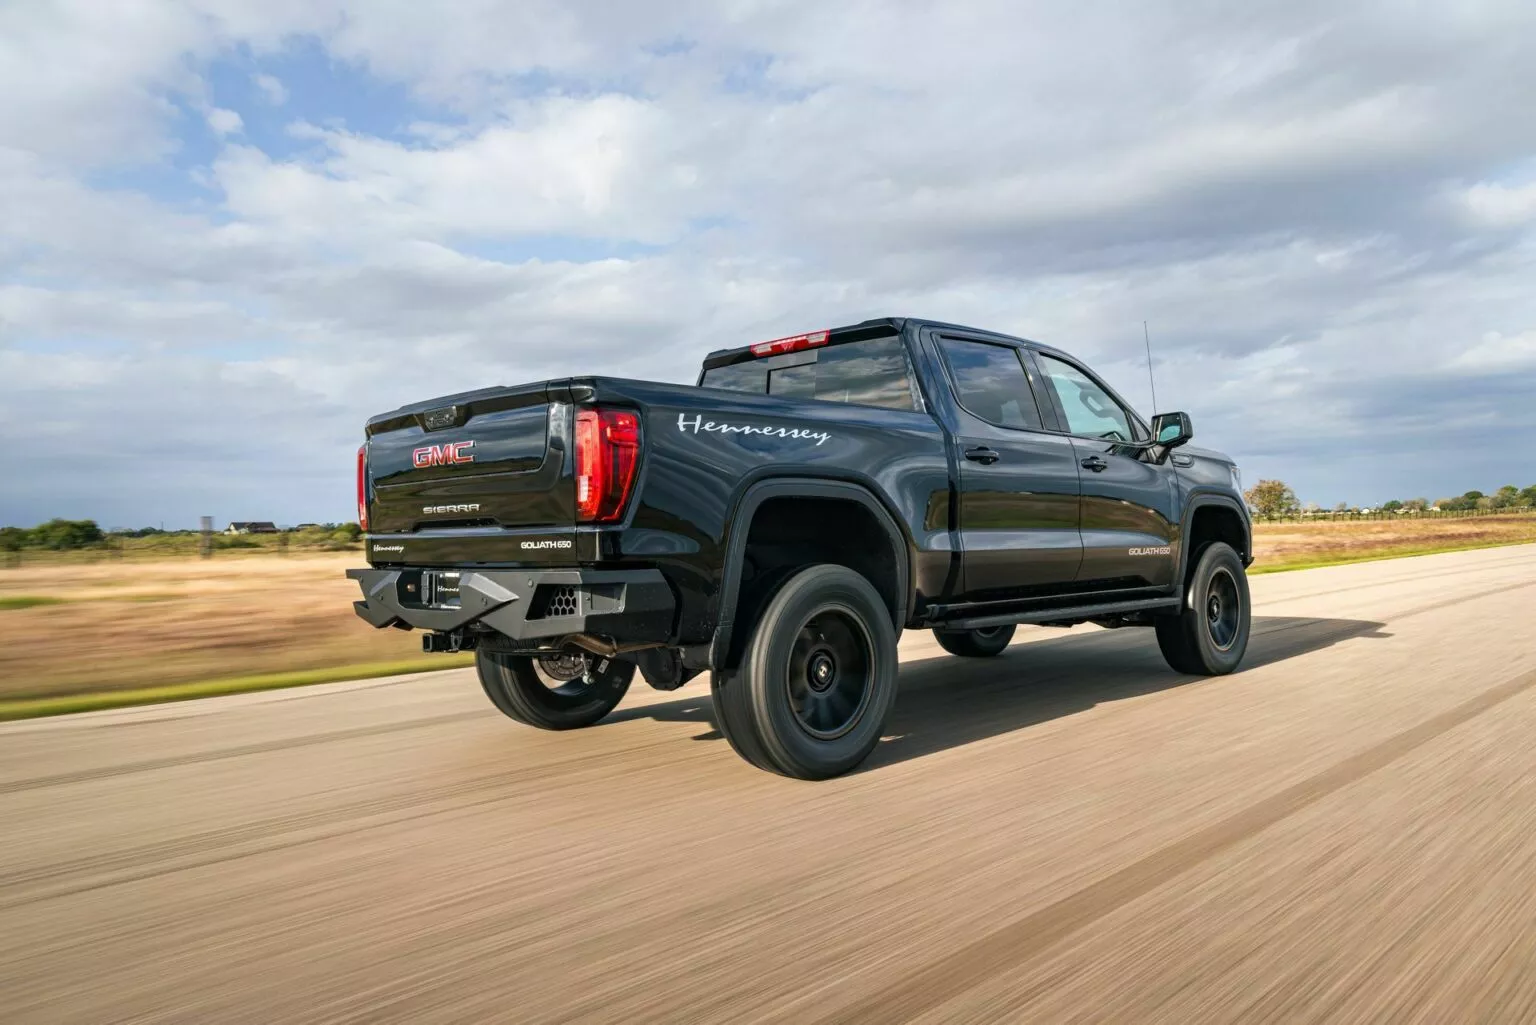 Hennessey powers the 6.2-liter V8 engine used by the Chevrolet Silverado and GMC Sierra